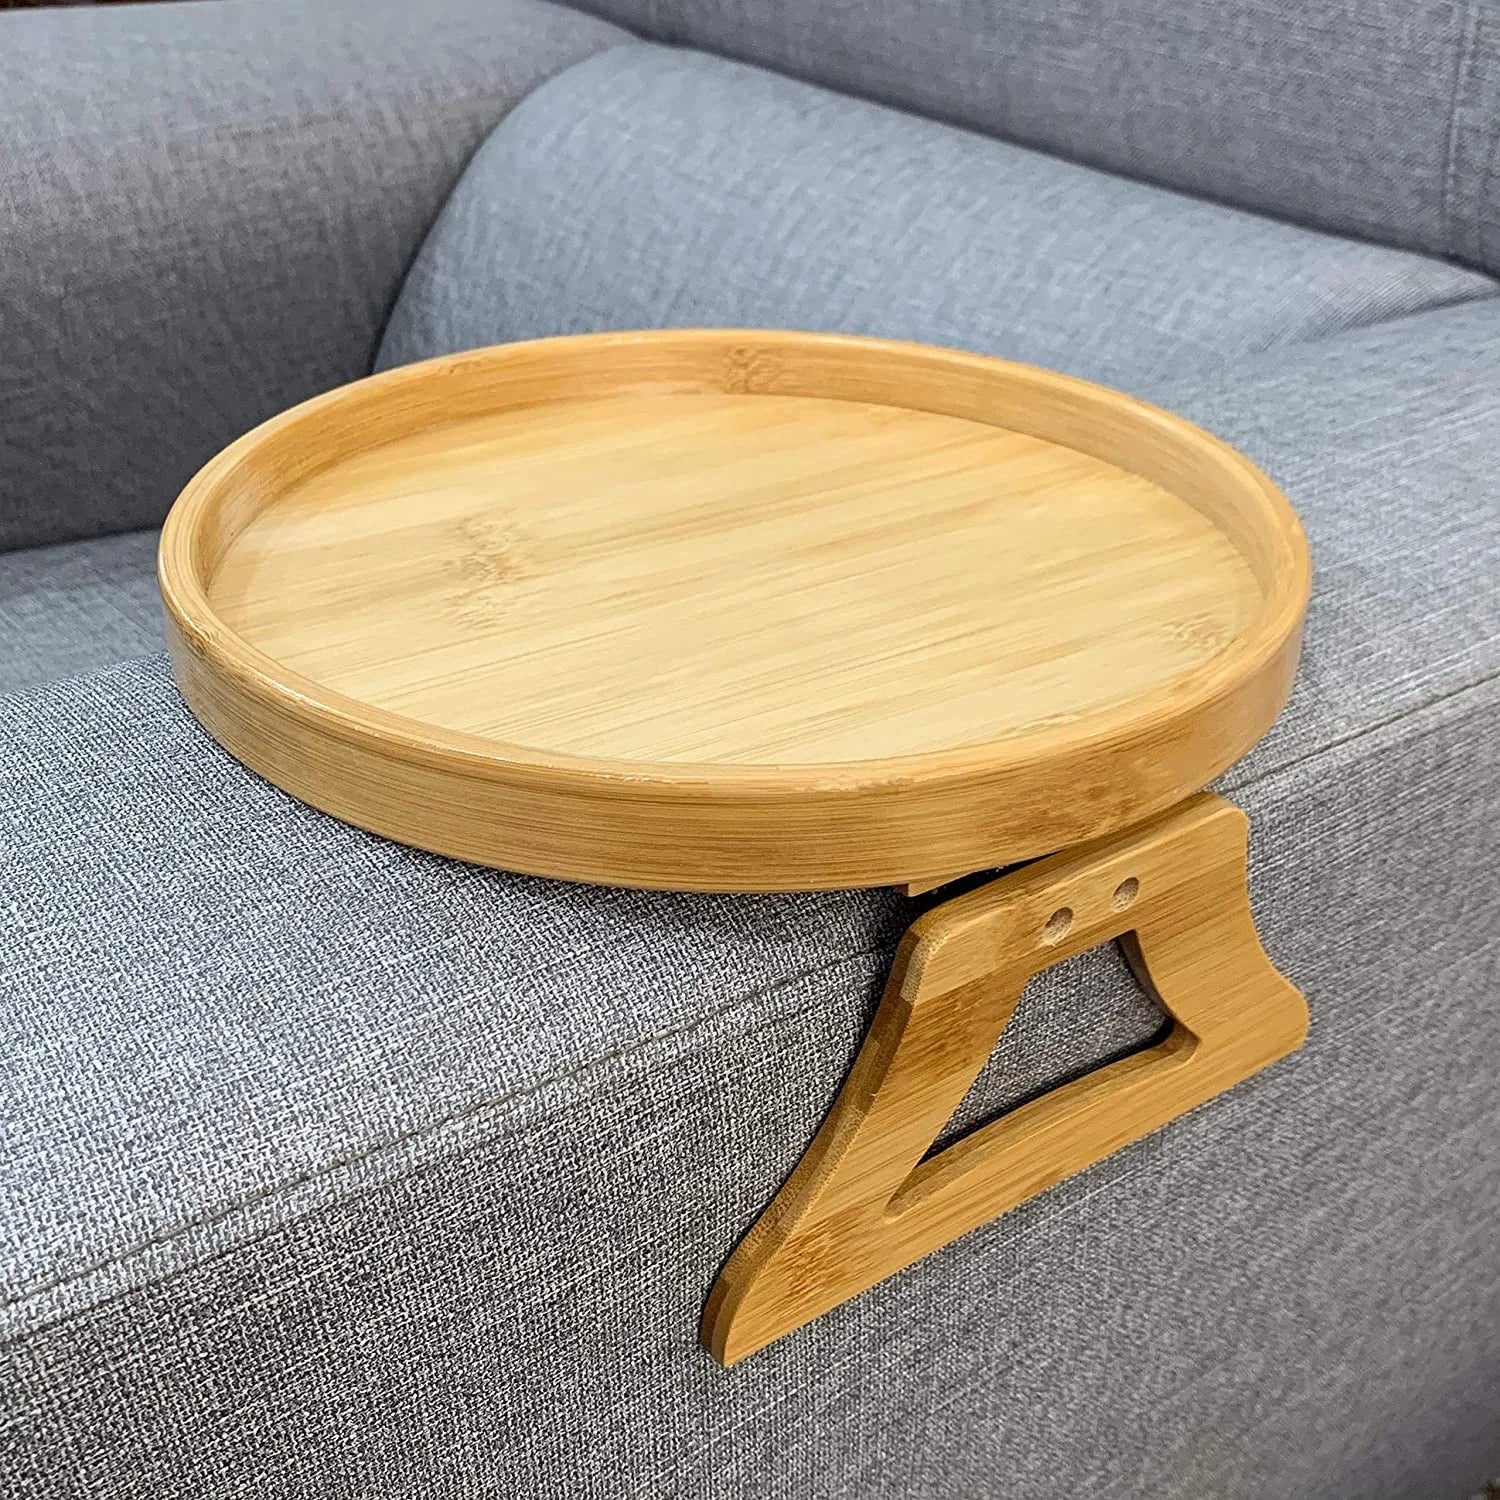 Cloud Discoveries Bamboo Sofa Tray Table - Clip-On Design